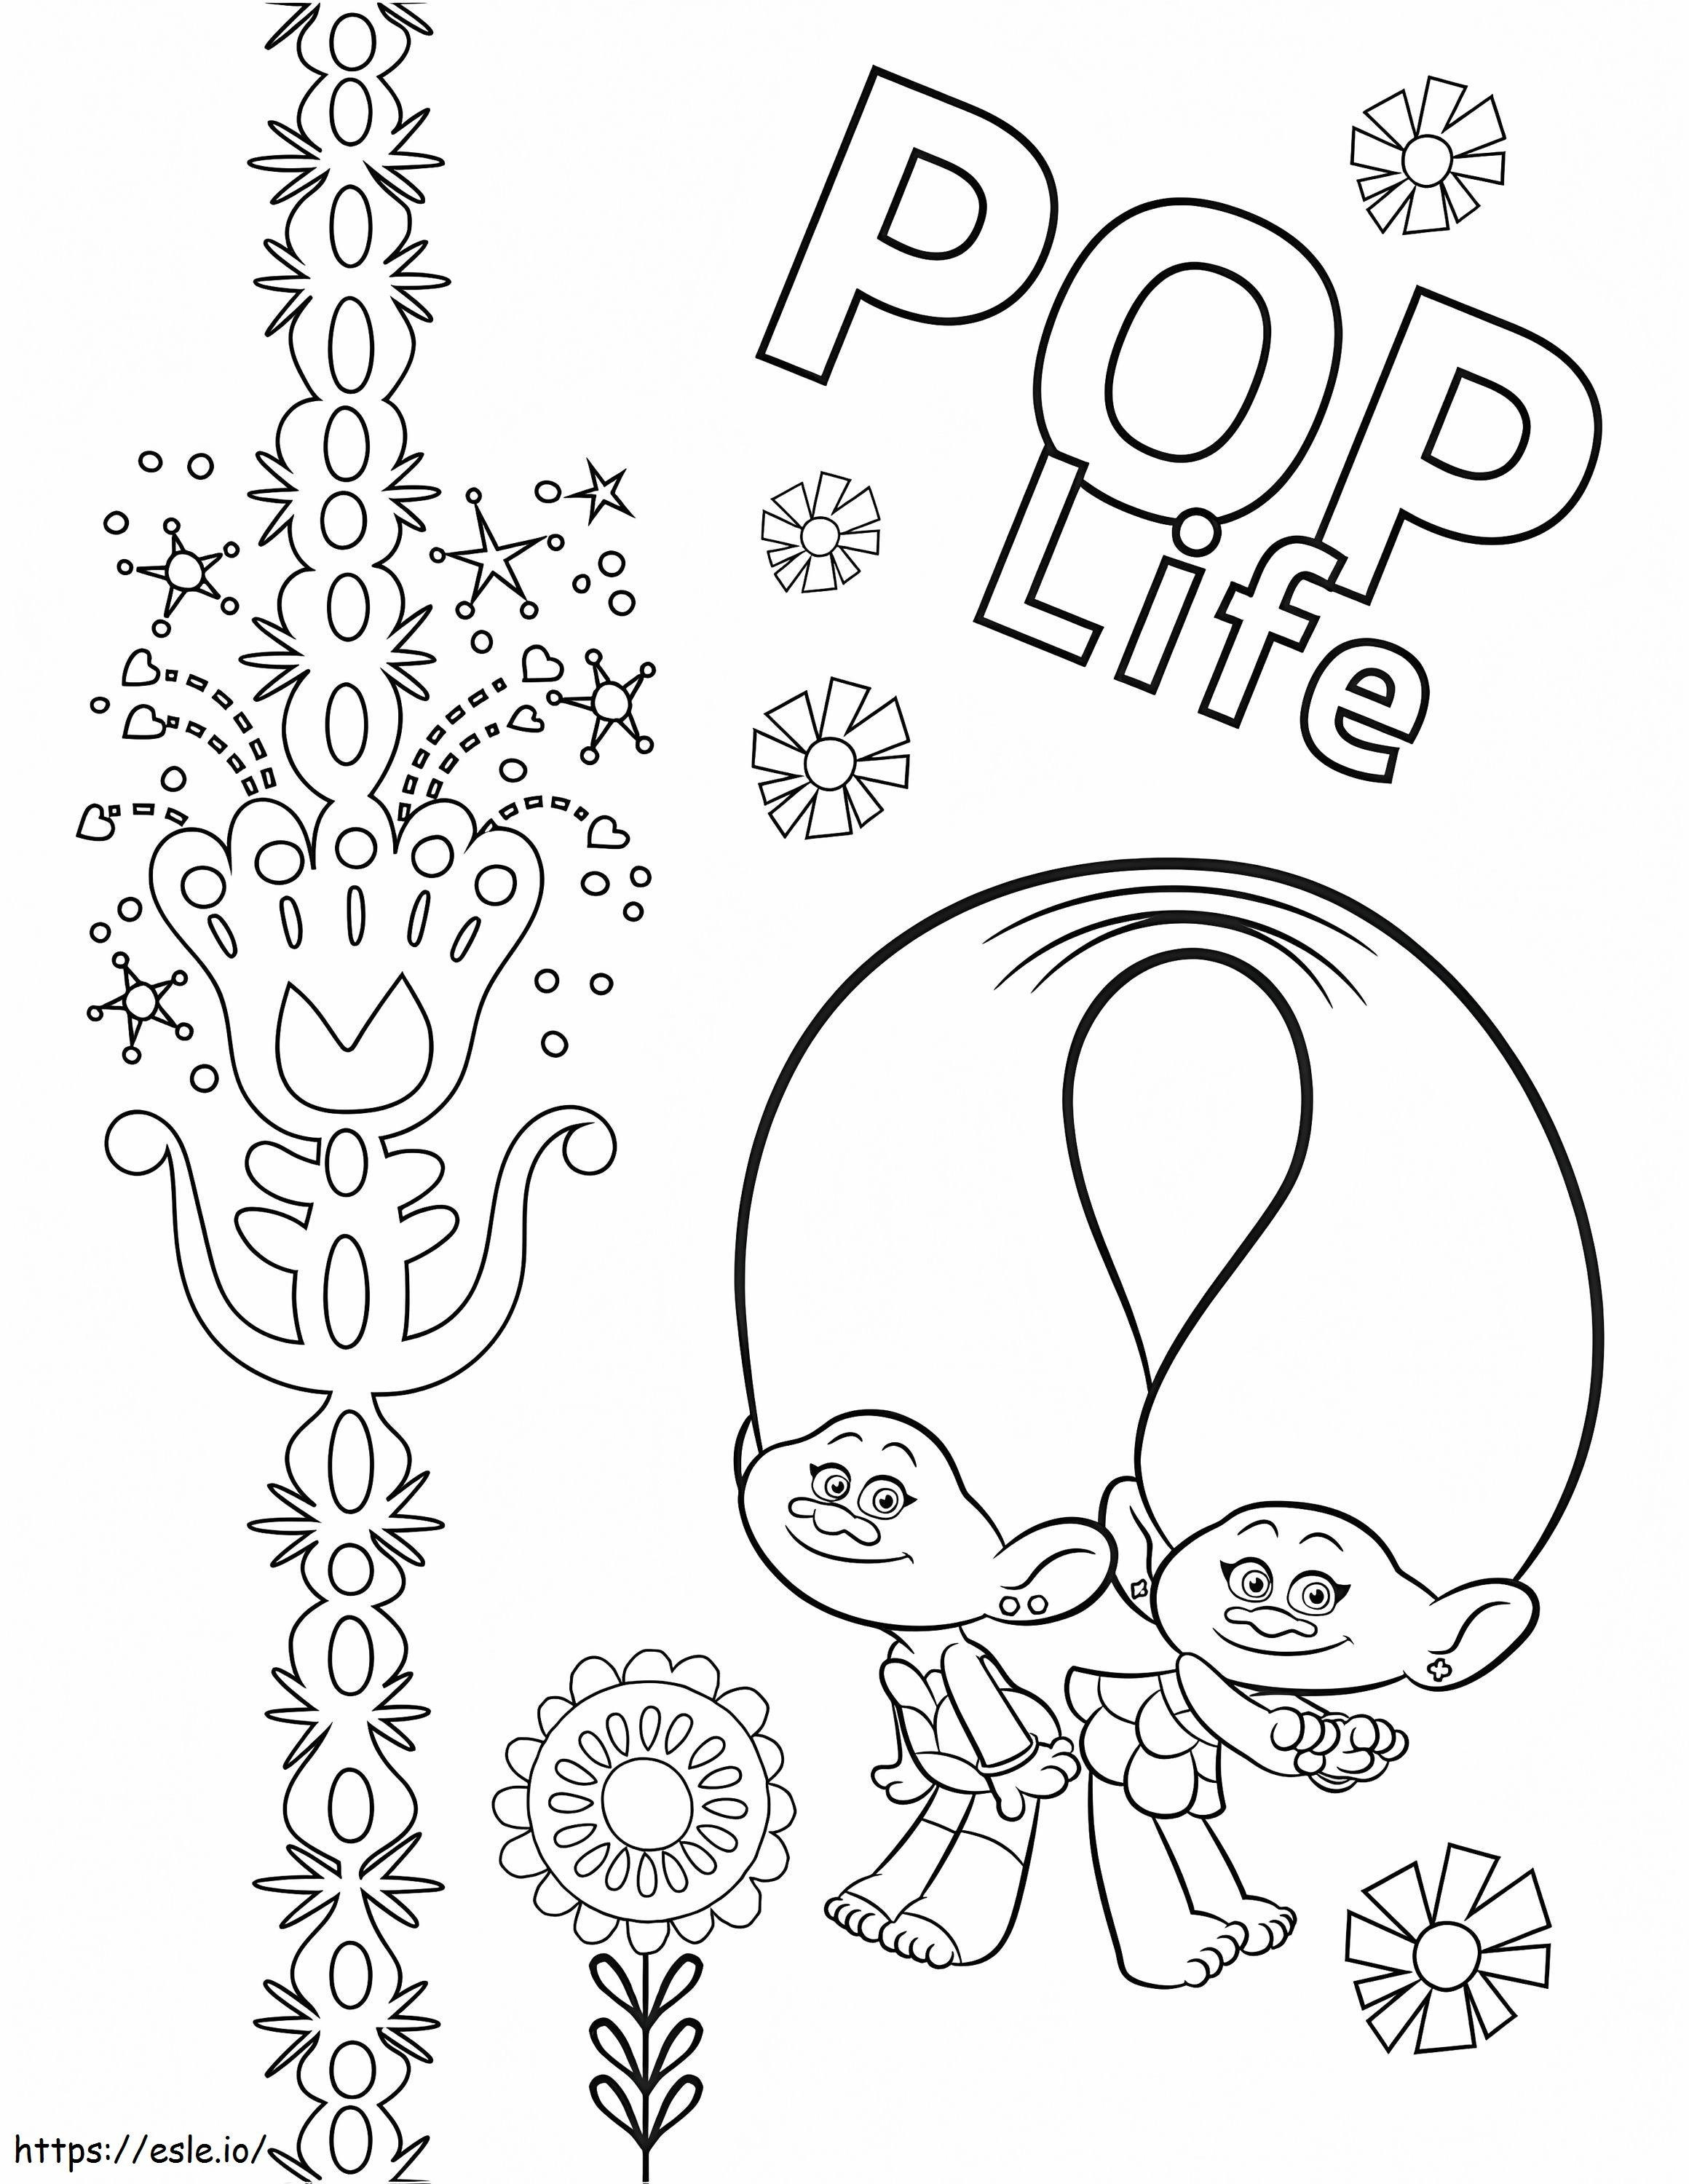 1589186525 Wonder Day Trolls 13 coloring page